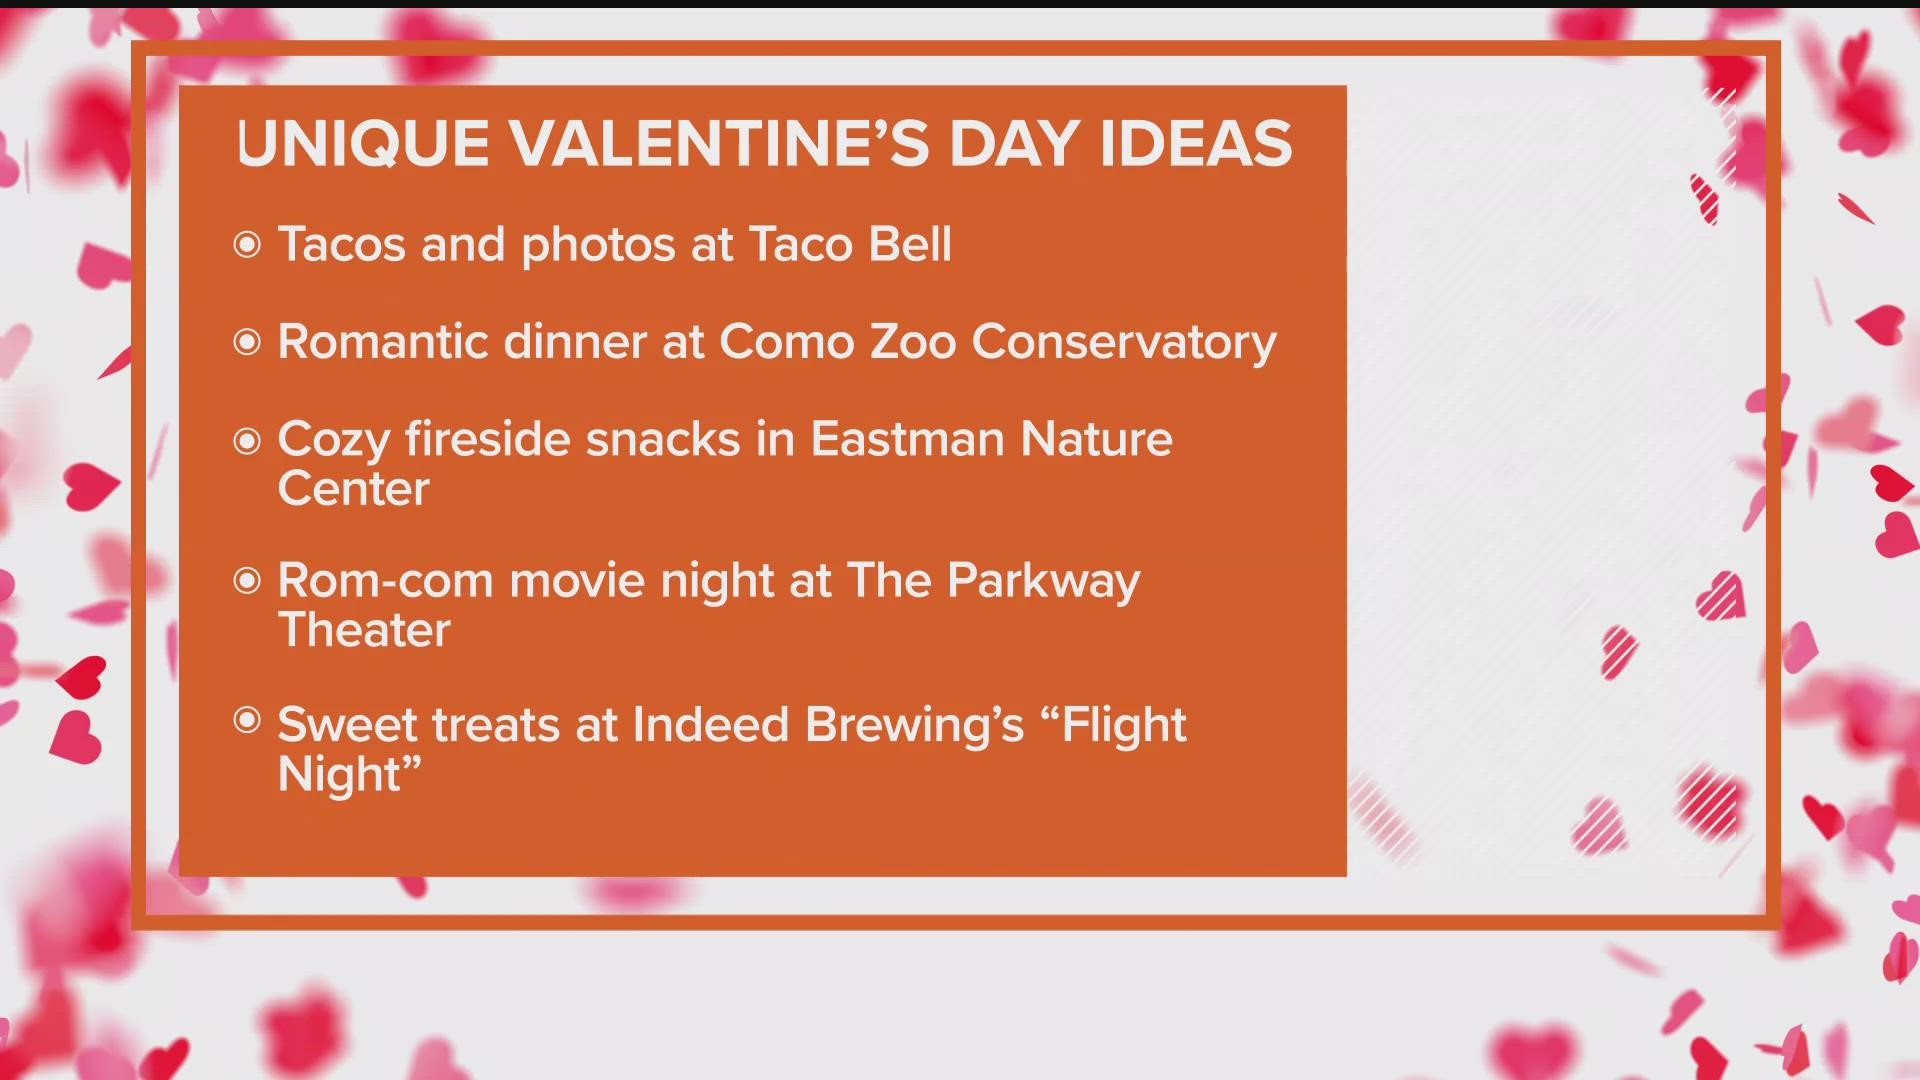 Tacos? Beer and chocolate flights? Show your love however you choose on Feb. 14.